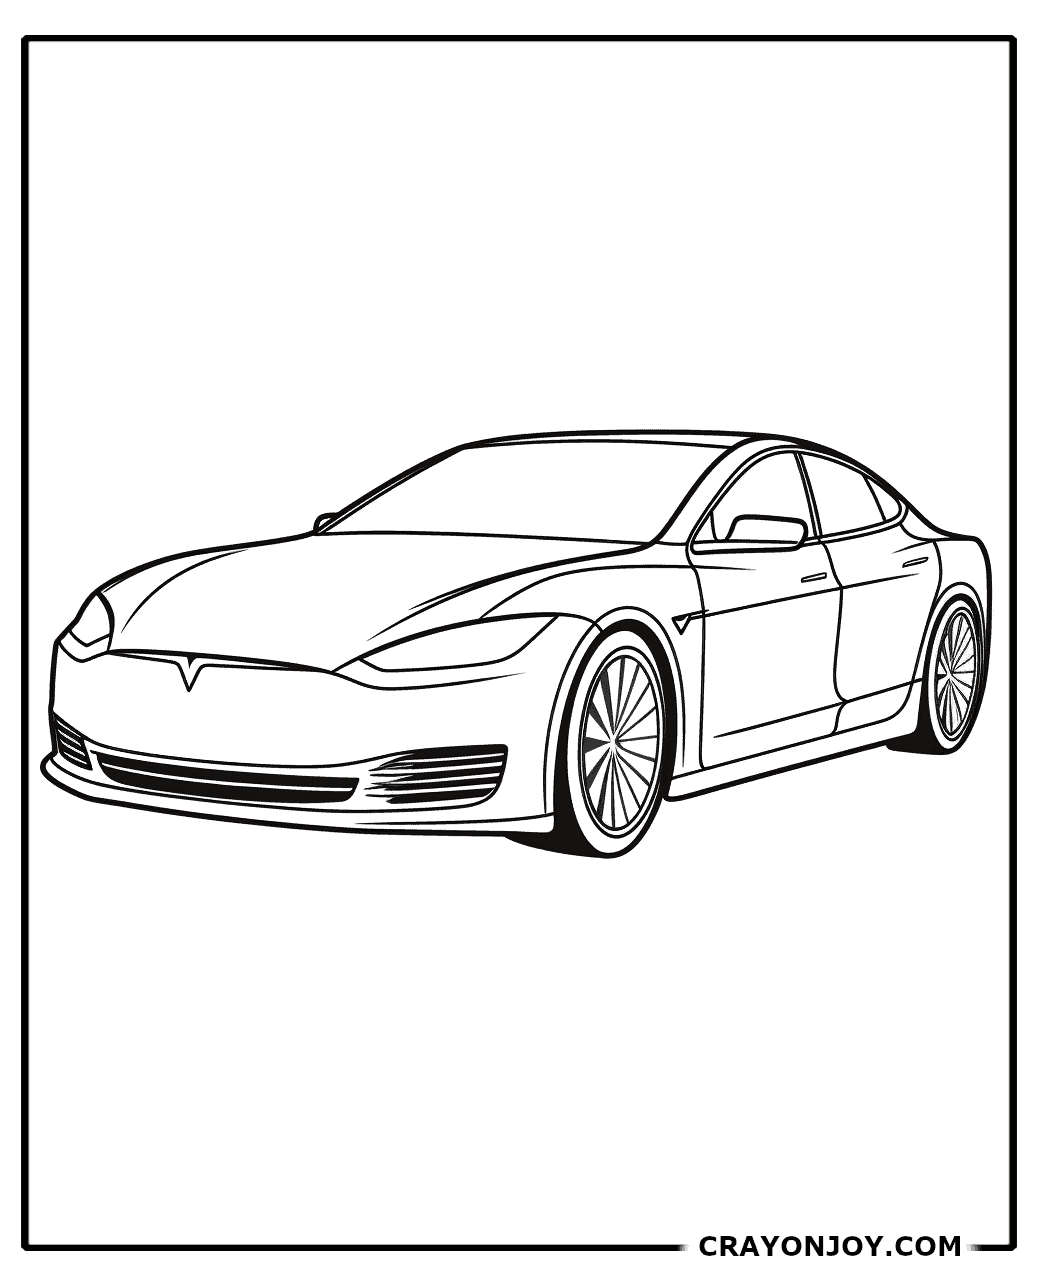 Free Printable Tesla Coloring Pages for Kids and Adults